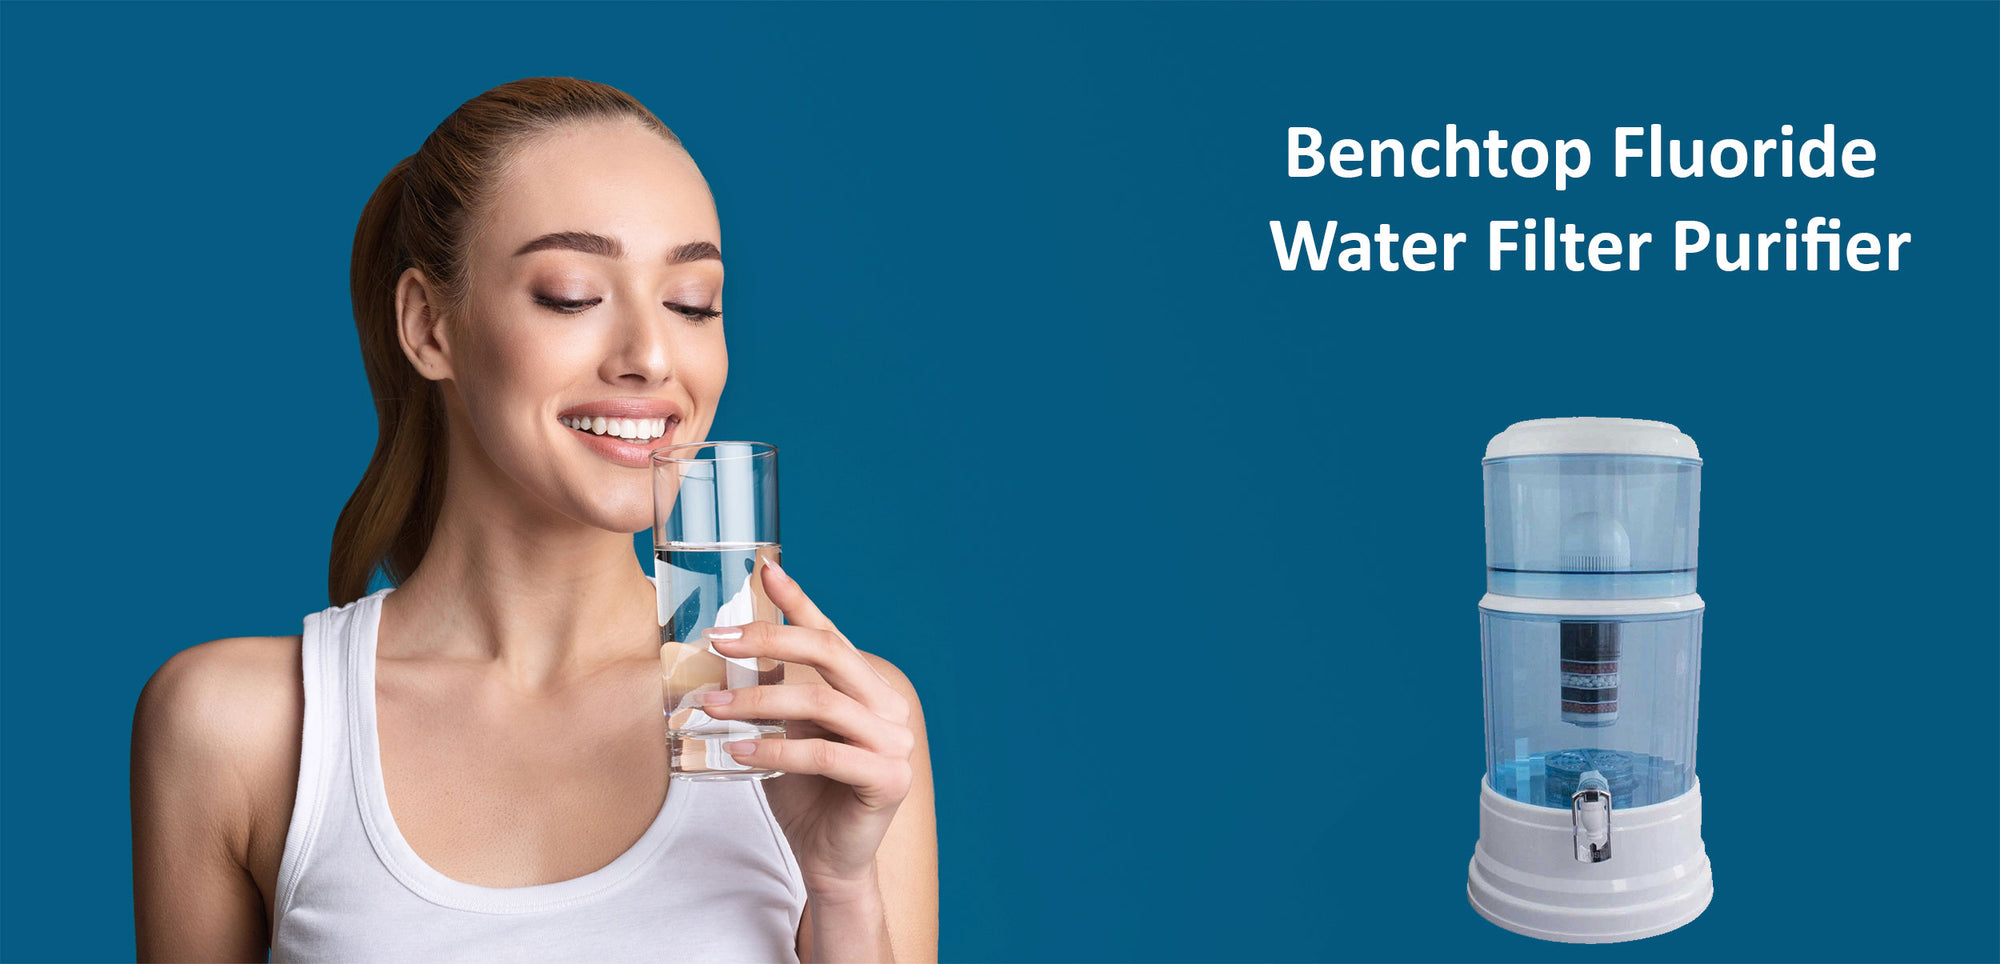 HOW THE BENCHTOP FLUORIDE WATER FILTERS THAT REMOVE FLUORIDE STEP BY STEP GUIDE